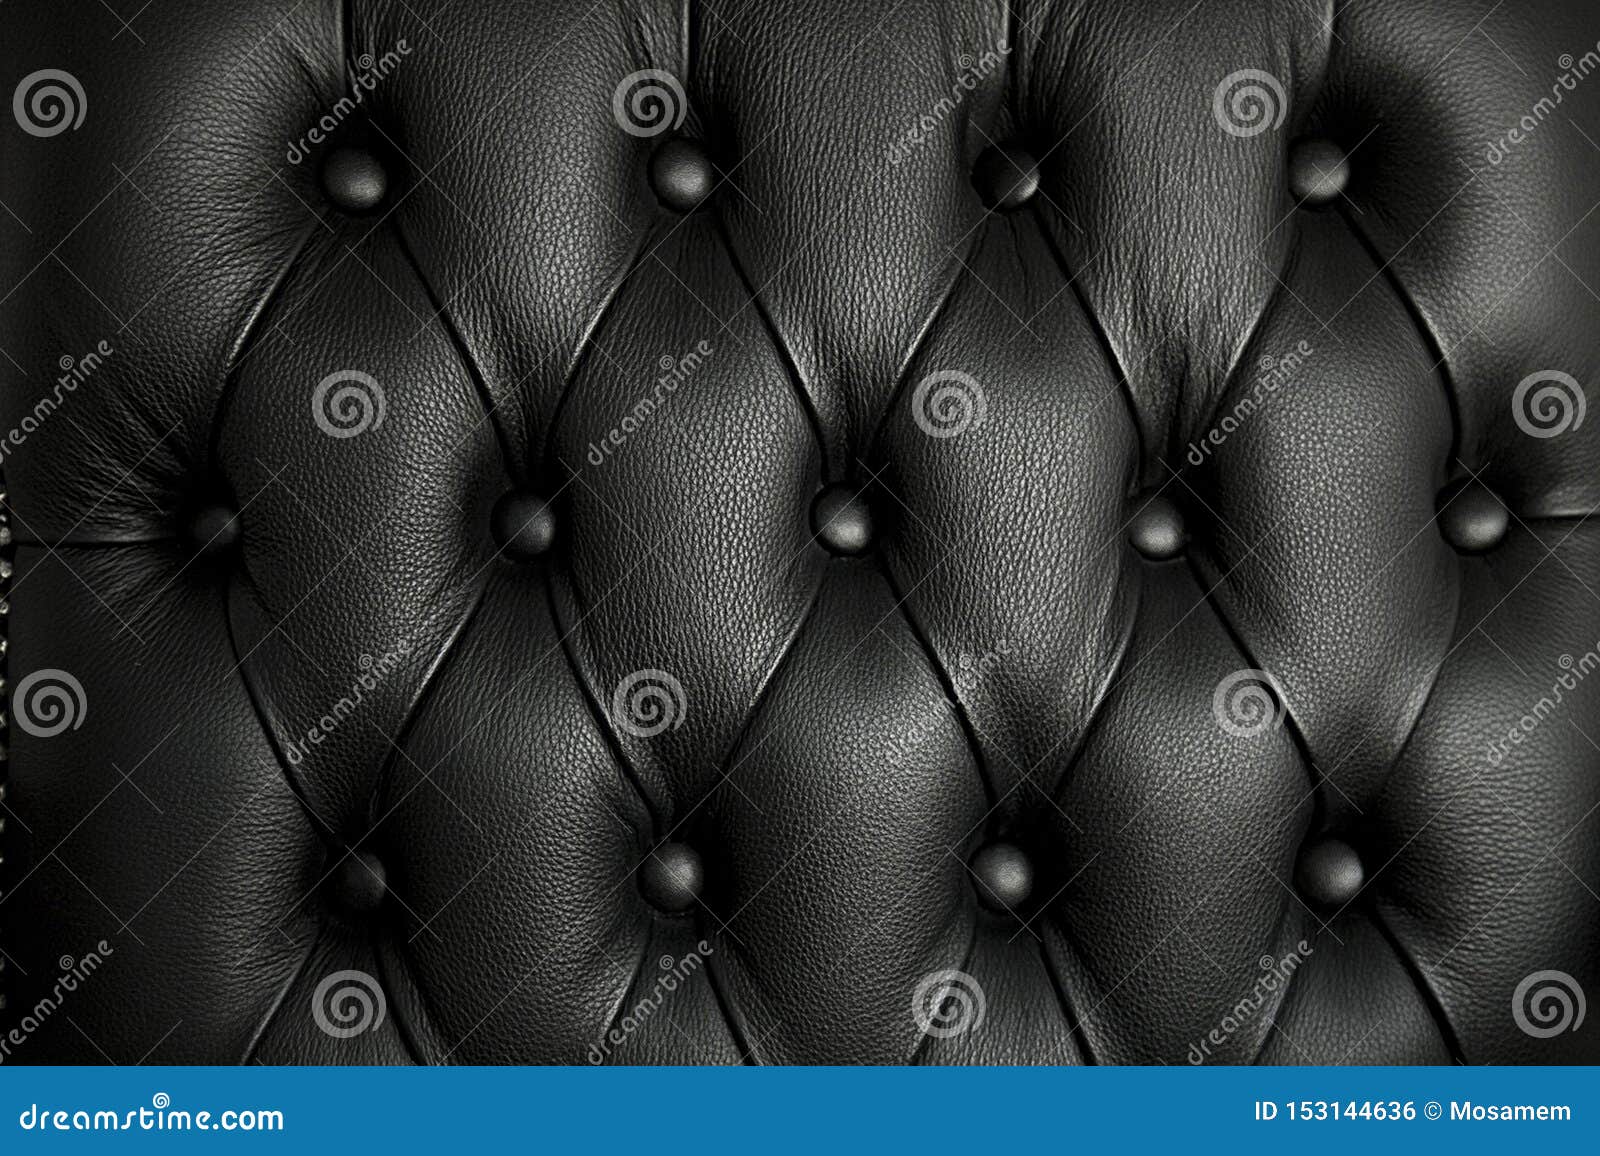 3d Capitone Leather Background Checkered Soft Fabric Textile Coach  Decoration with Buttons Stock Illustration - Illustration of abstract,  modern: 153144636